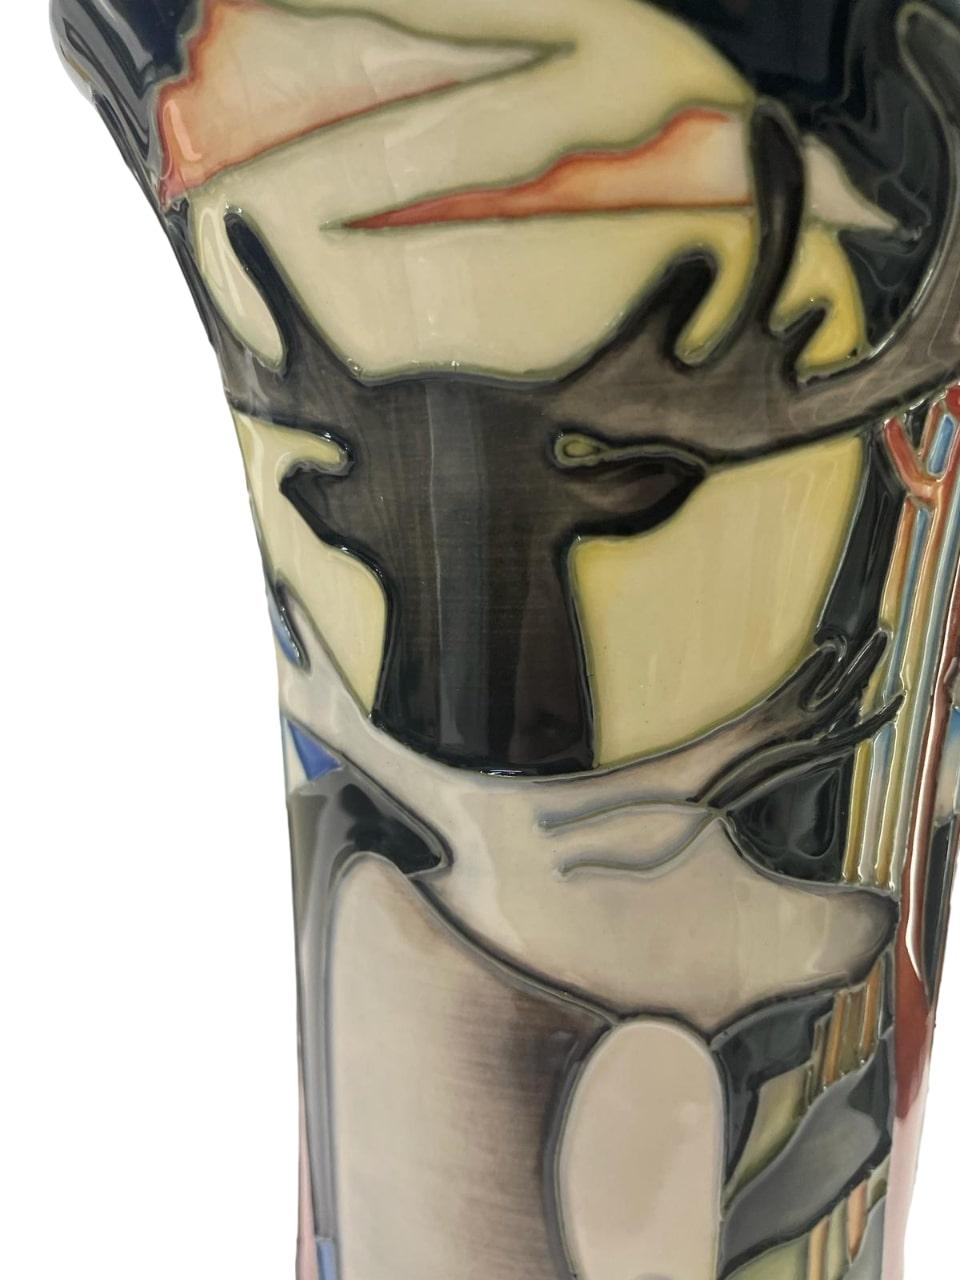 Glazed LIMITED EDITION MOORCROFT Wapiti vase by Emma Bossons dated 2012 31/35 For Sale